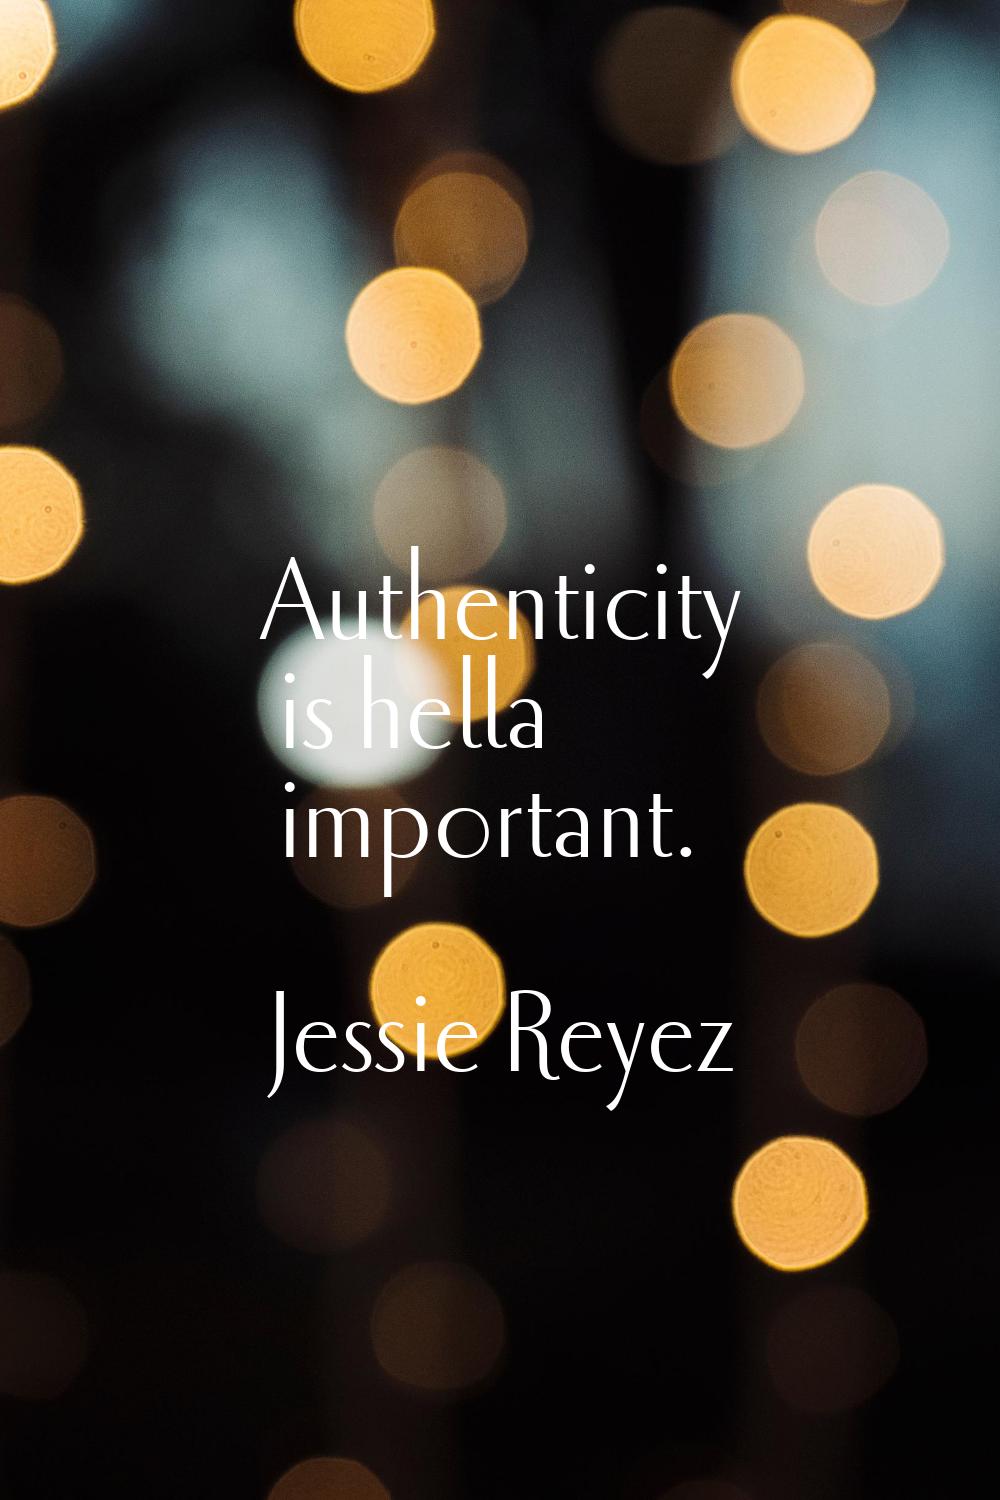 Authenticity is hella important.